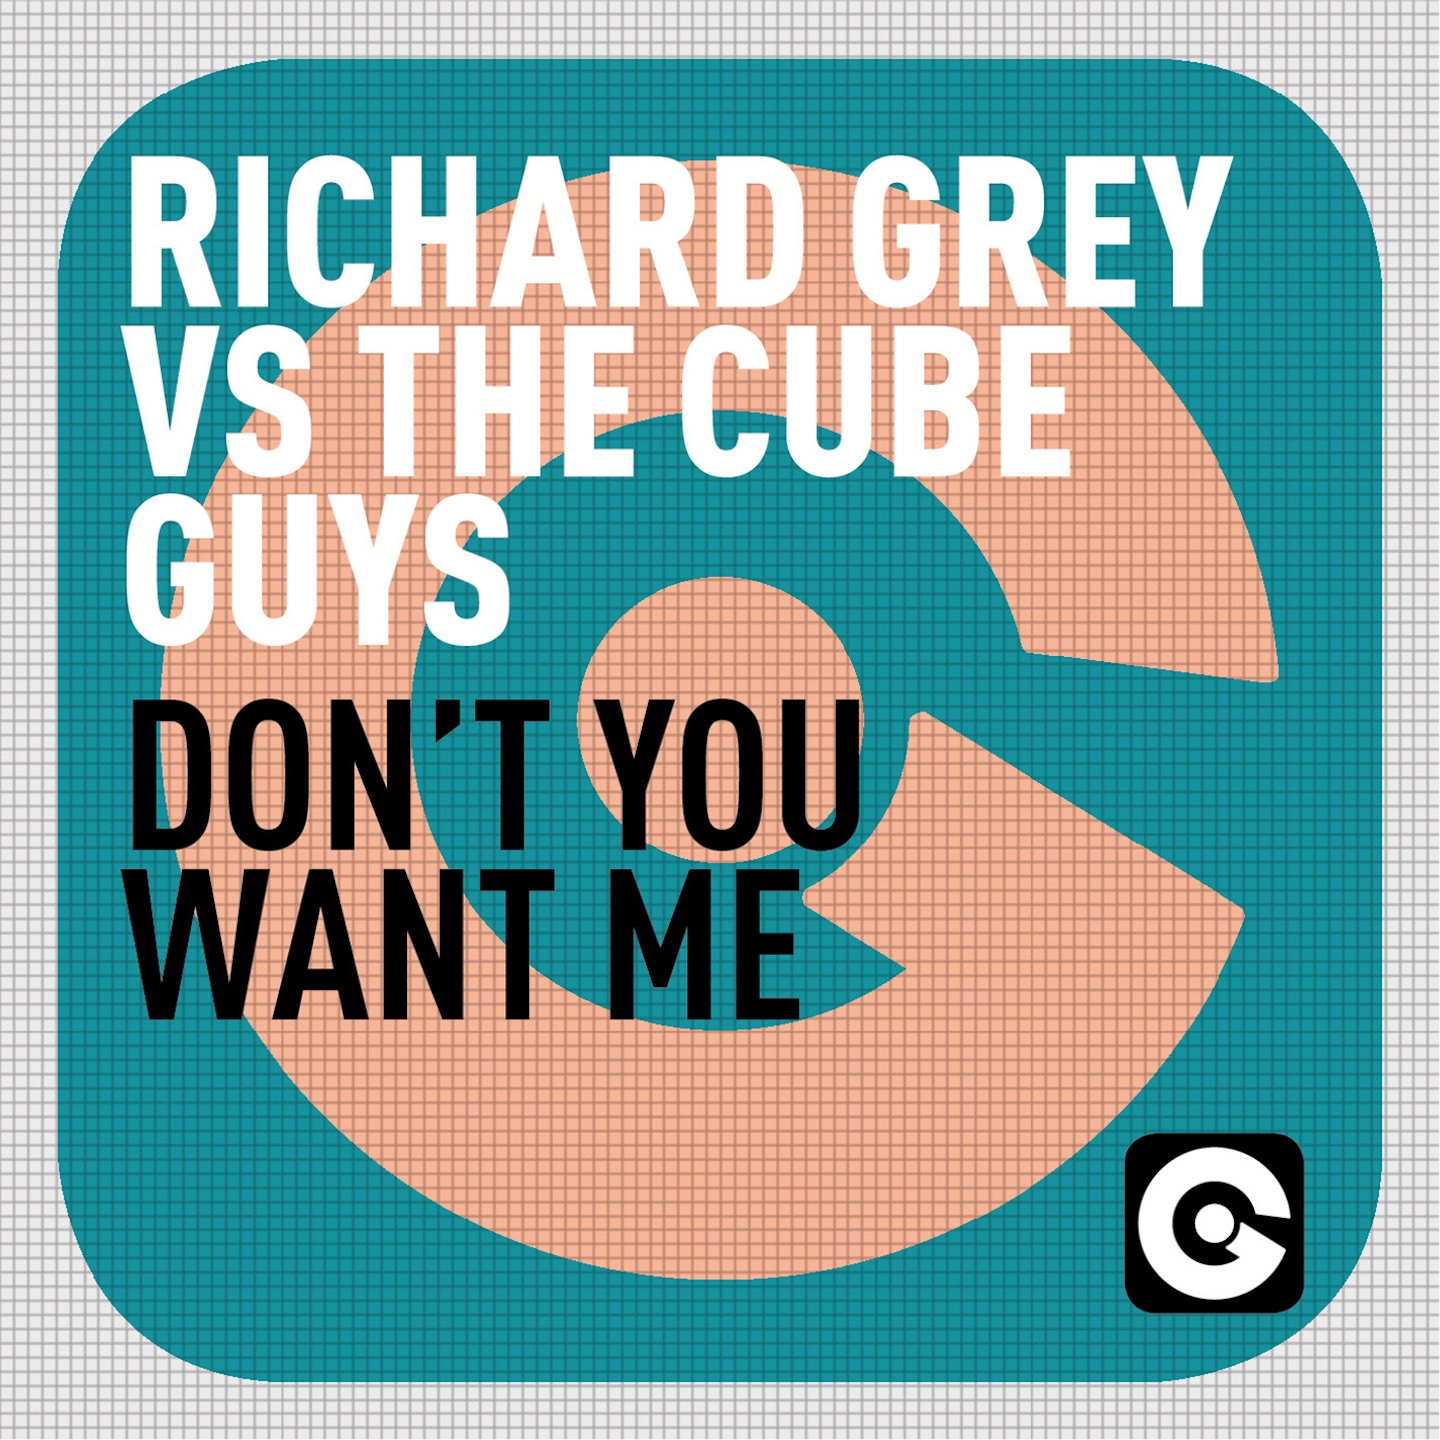 Don't You Want Me (The Cube Guys Mix)